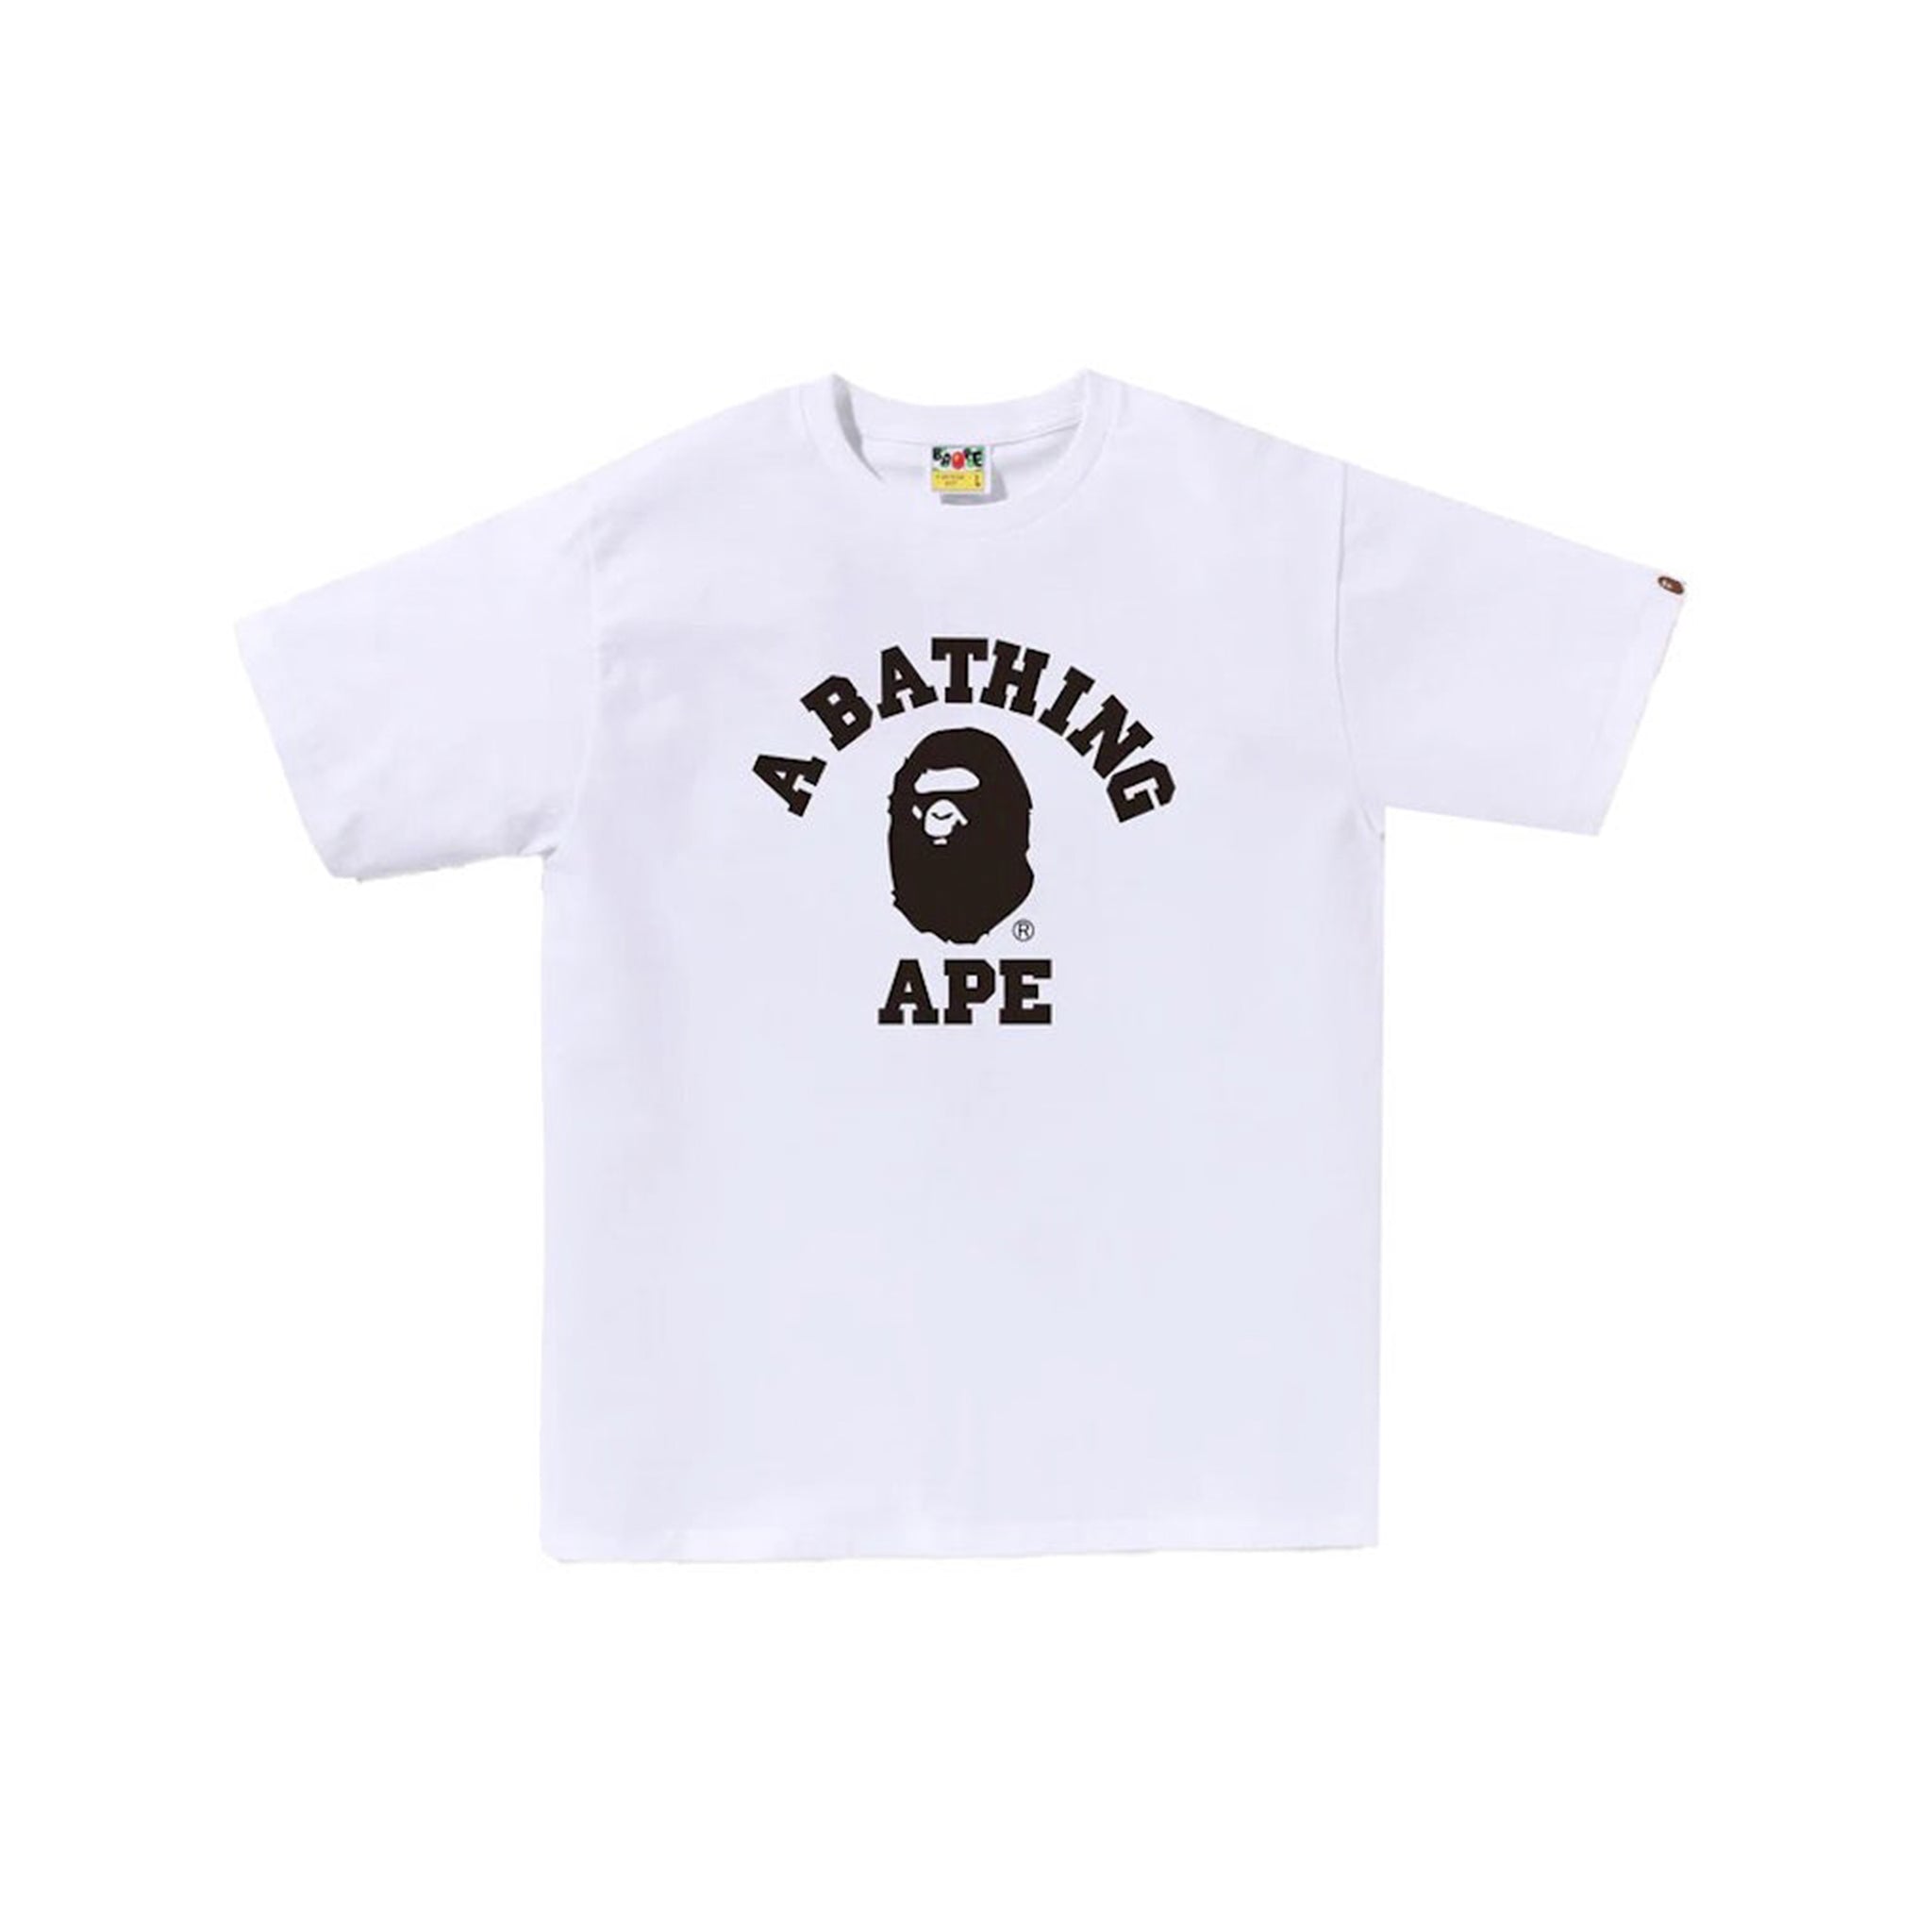 By Bathing Ape Bicolor College White Tee